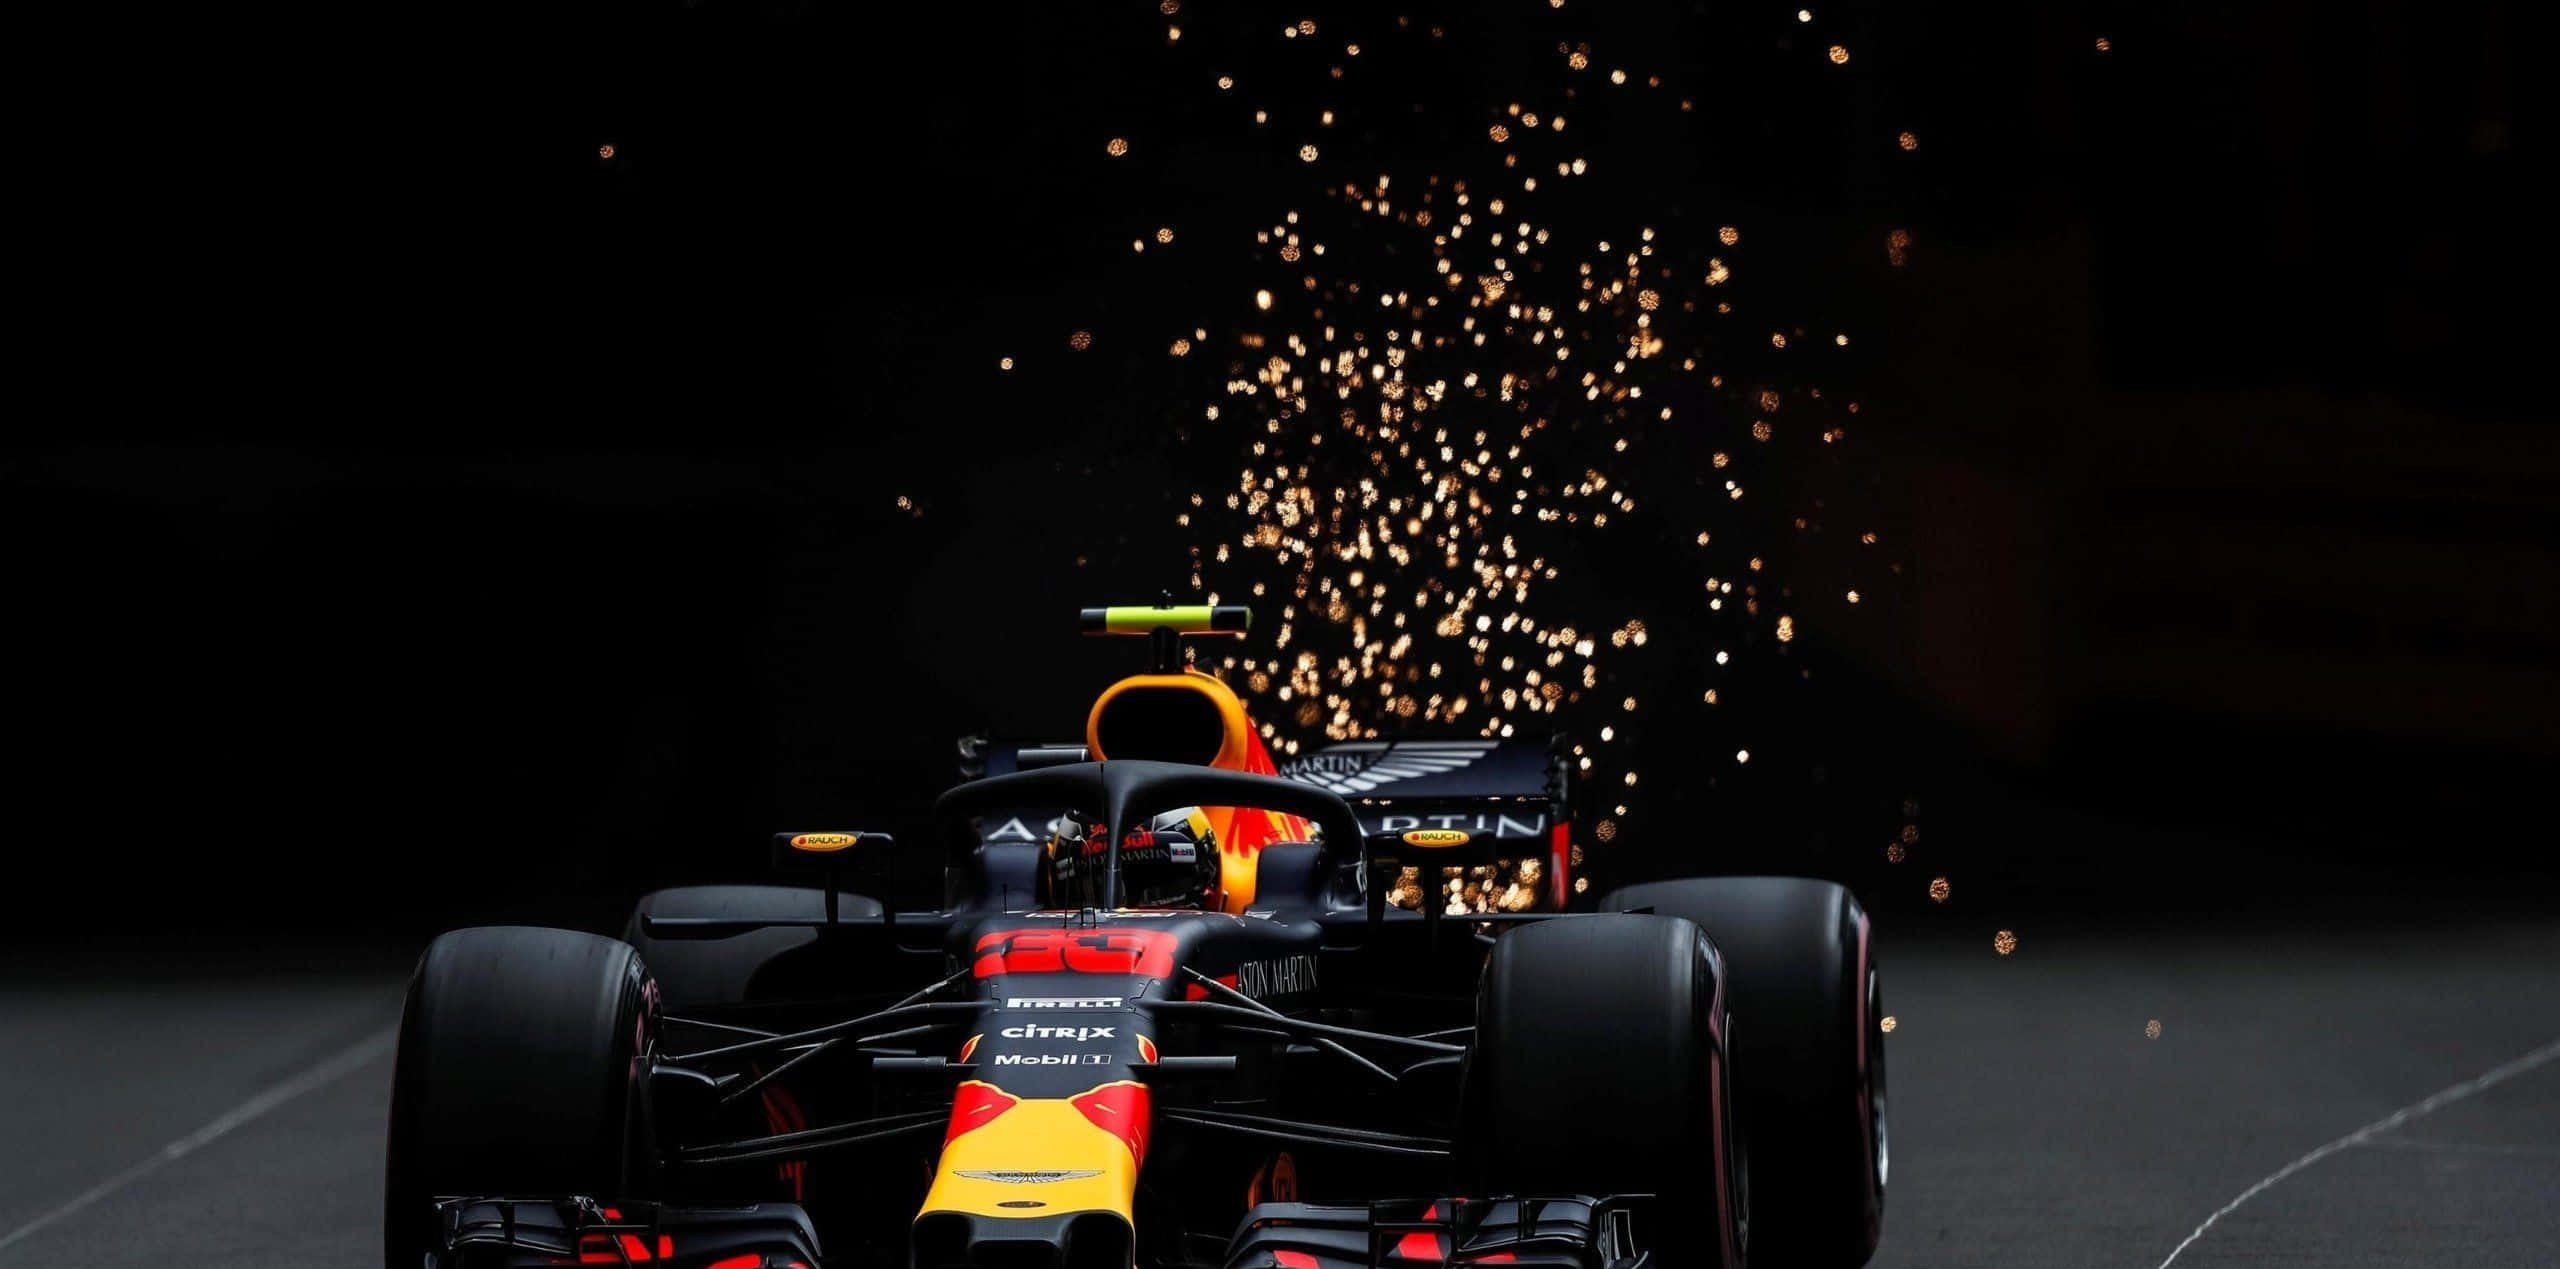 Max Verstappen in action during a Formula One race